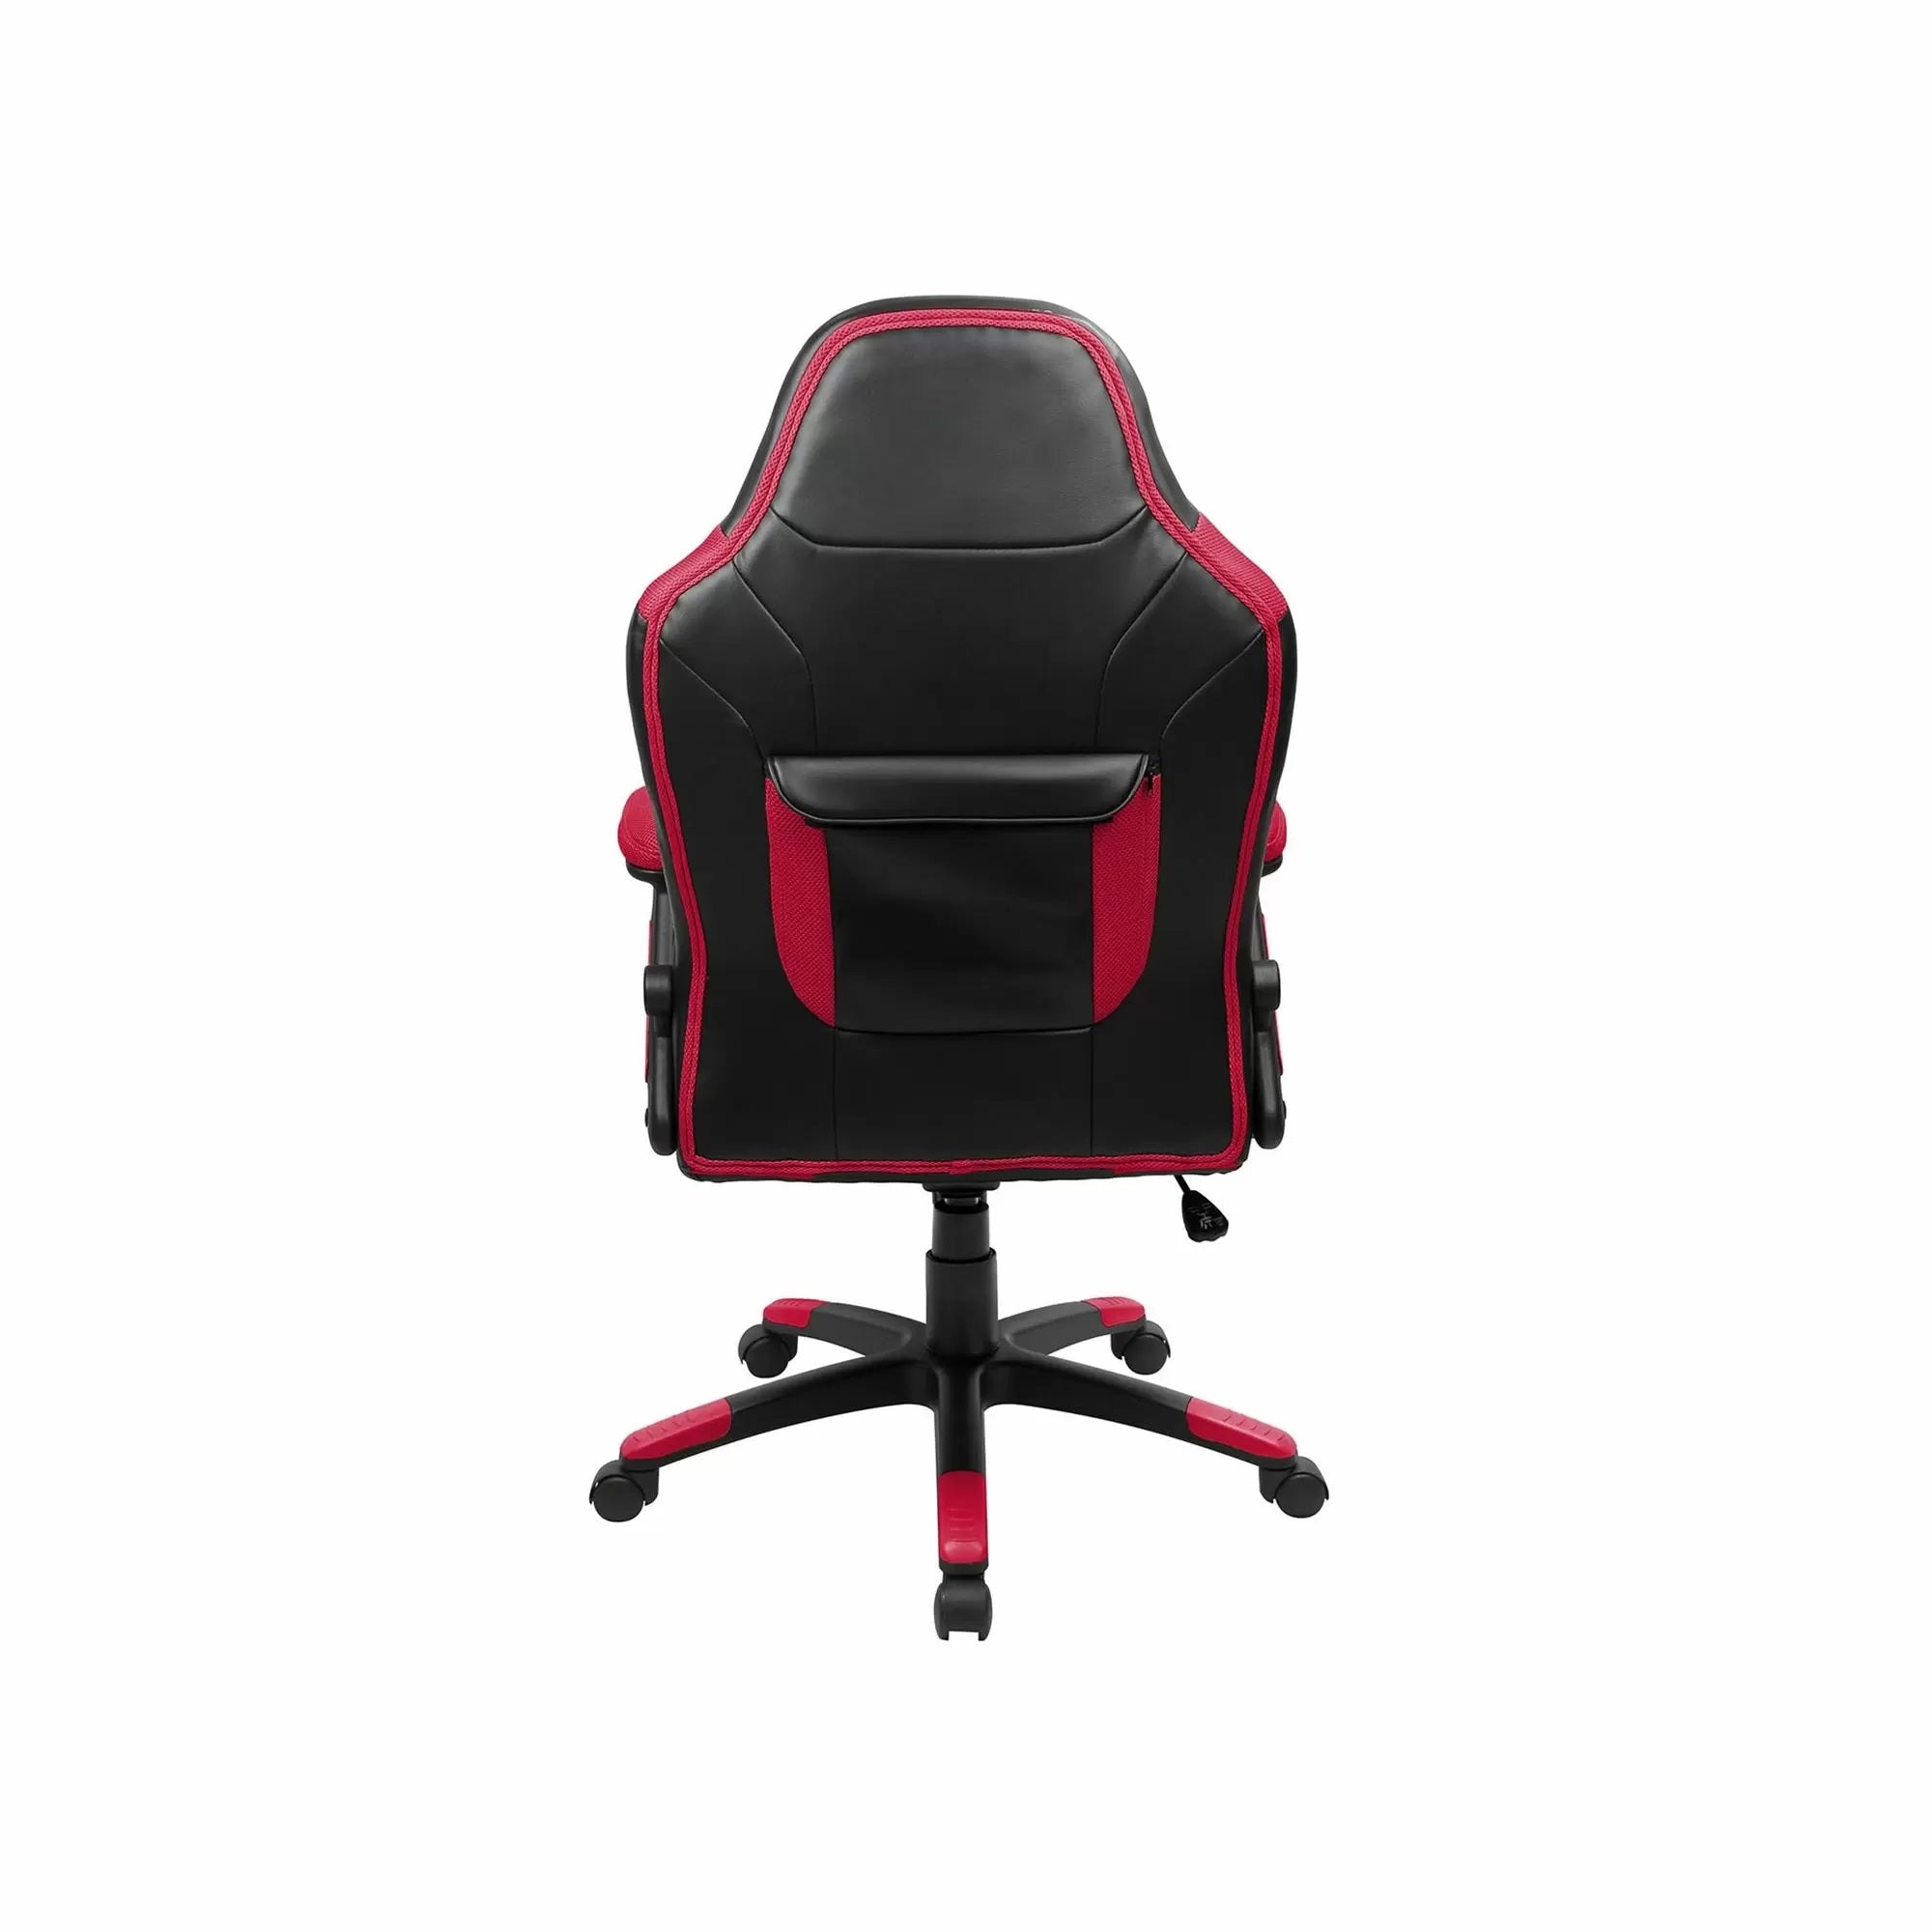 Imperial USA Oversized Video Gaming Chair Black Red Back